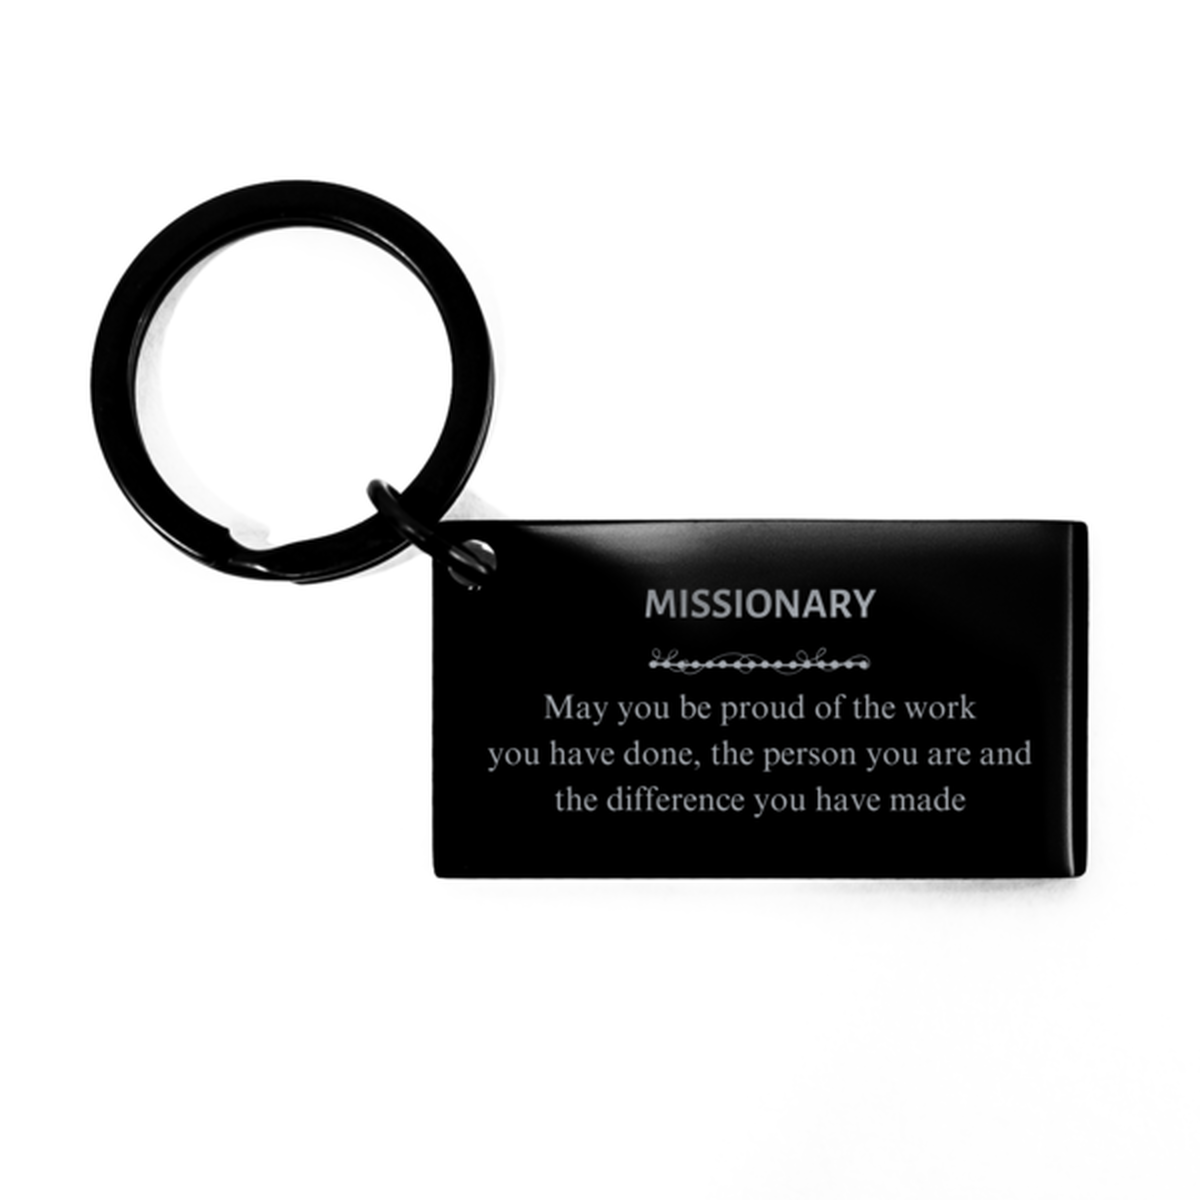 Orthopedic Surgeon May you be proud of the work you have done, Retirement Missionary Keychain for Colleague Appreciation Gifts Amazing for Missionary